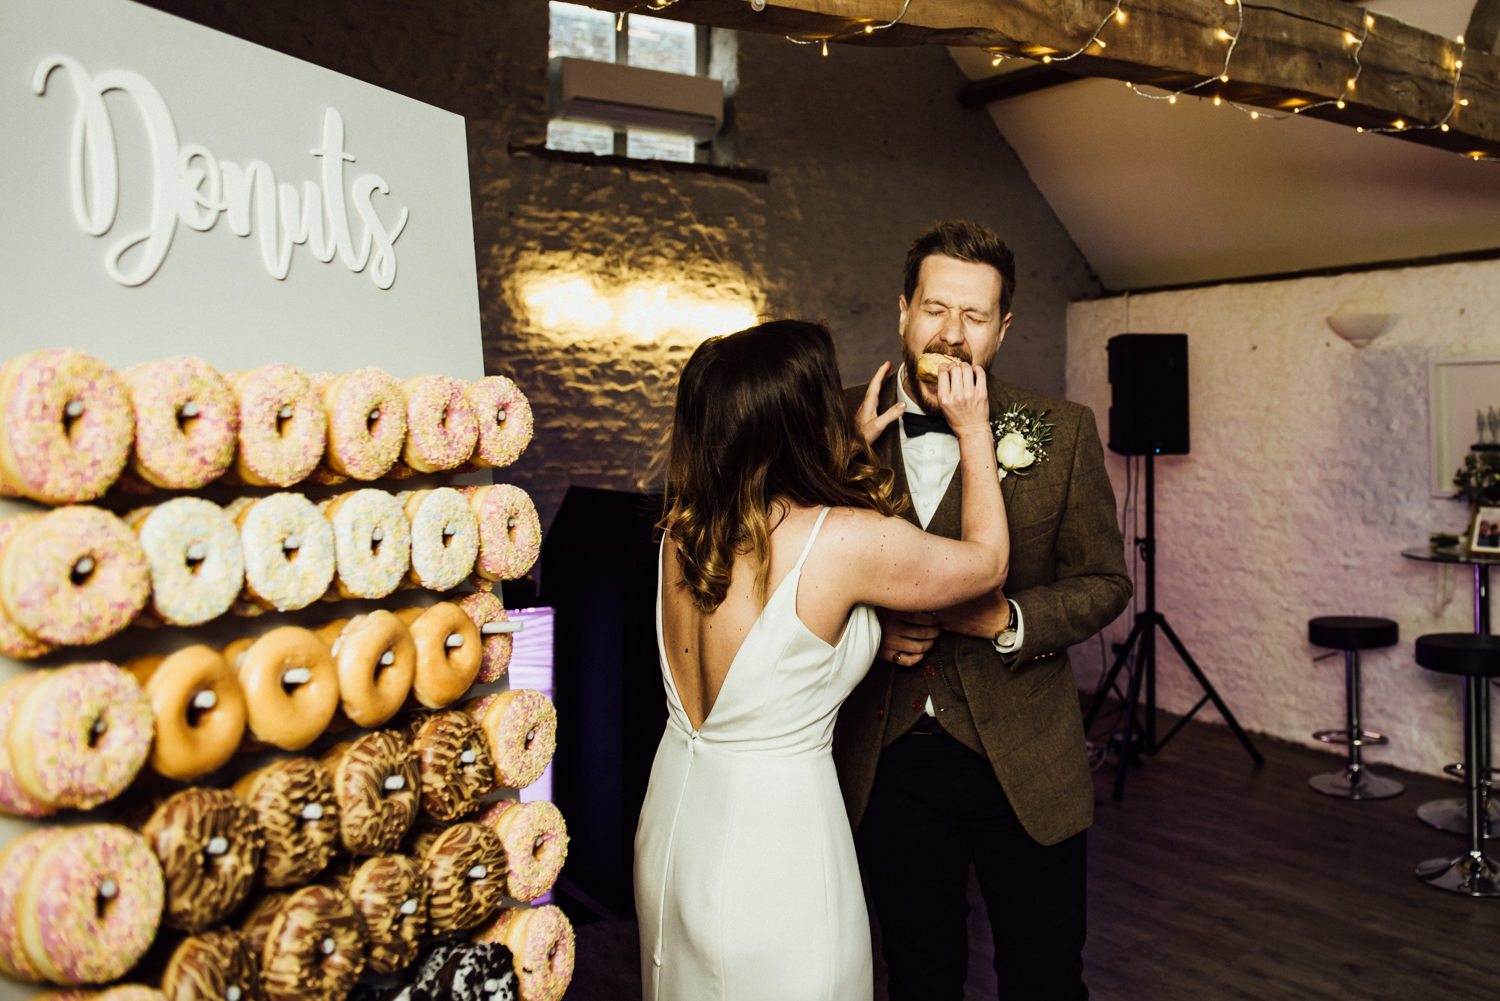 The couple went for a glazed donut wall instead of a traditional wedding cake